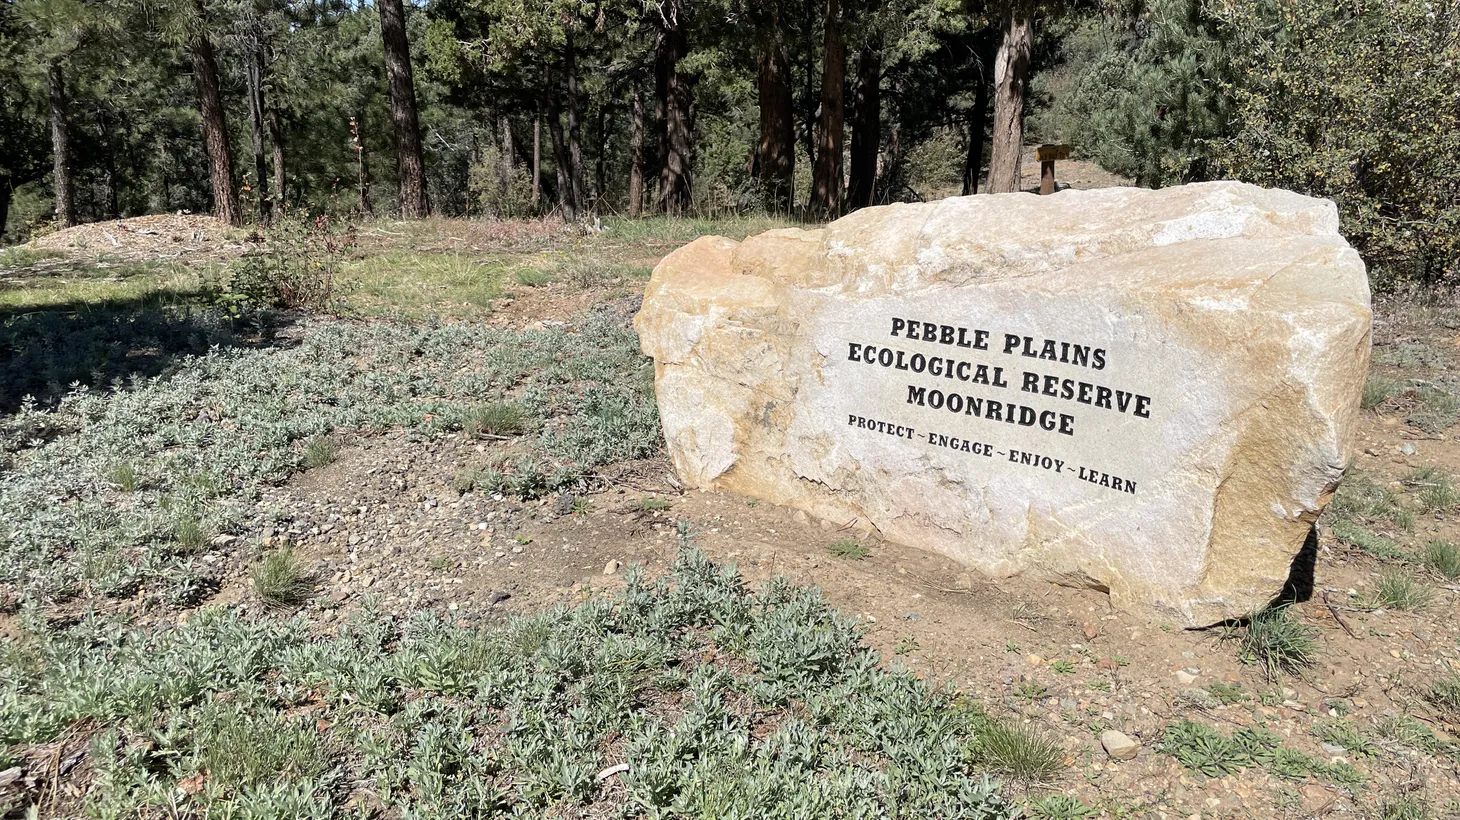 Only several hundred acres remain of the Pebble Plains ecosystem, and most of the million-year-old plant species that exist only in the San Bernardino mountains are protected.